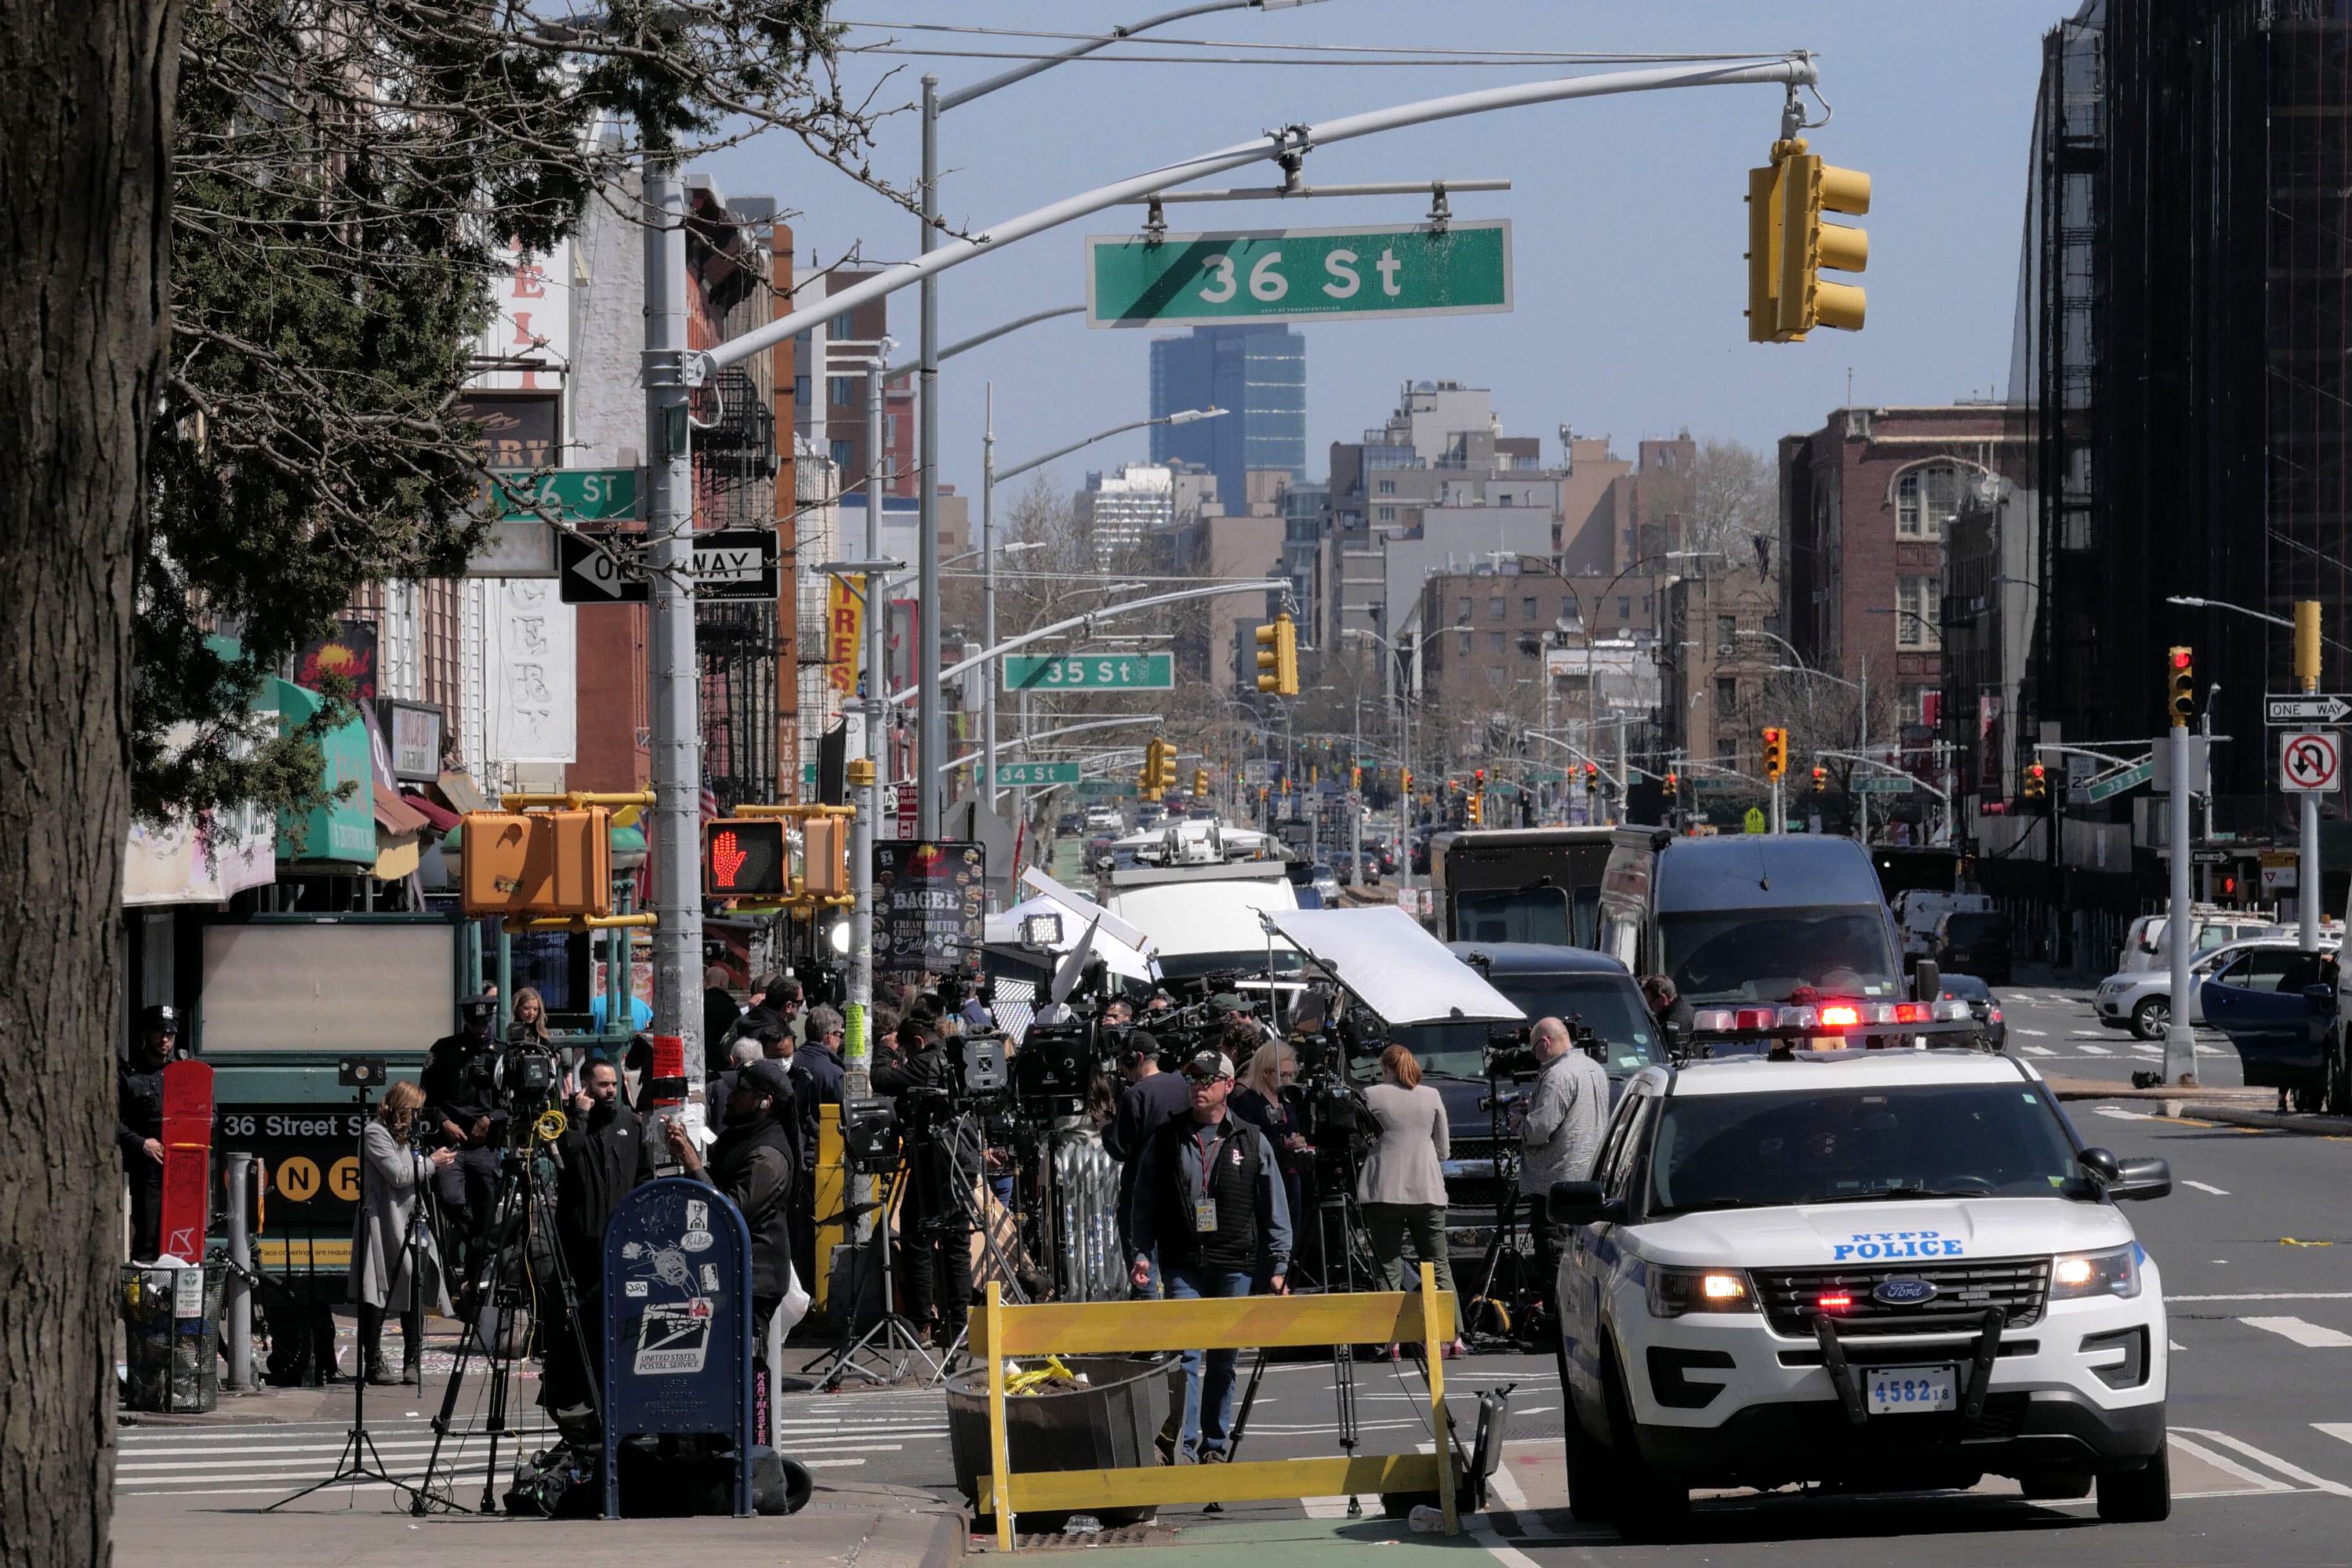 Police and media converge on the 36th Street station in Sunset Park. April 13, 2022.